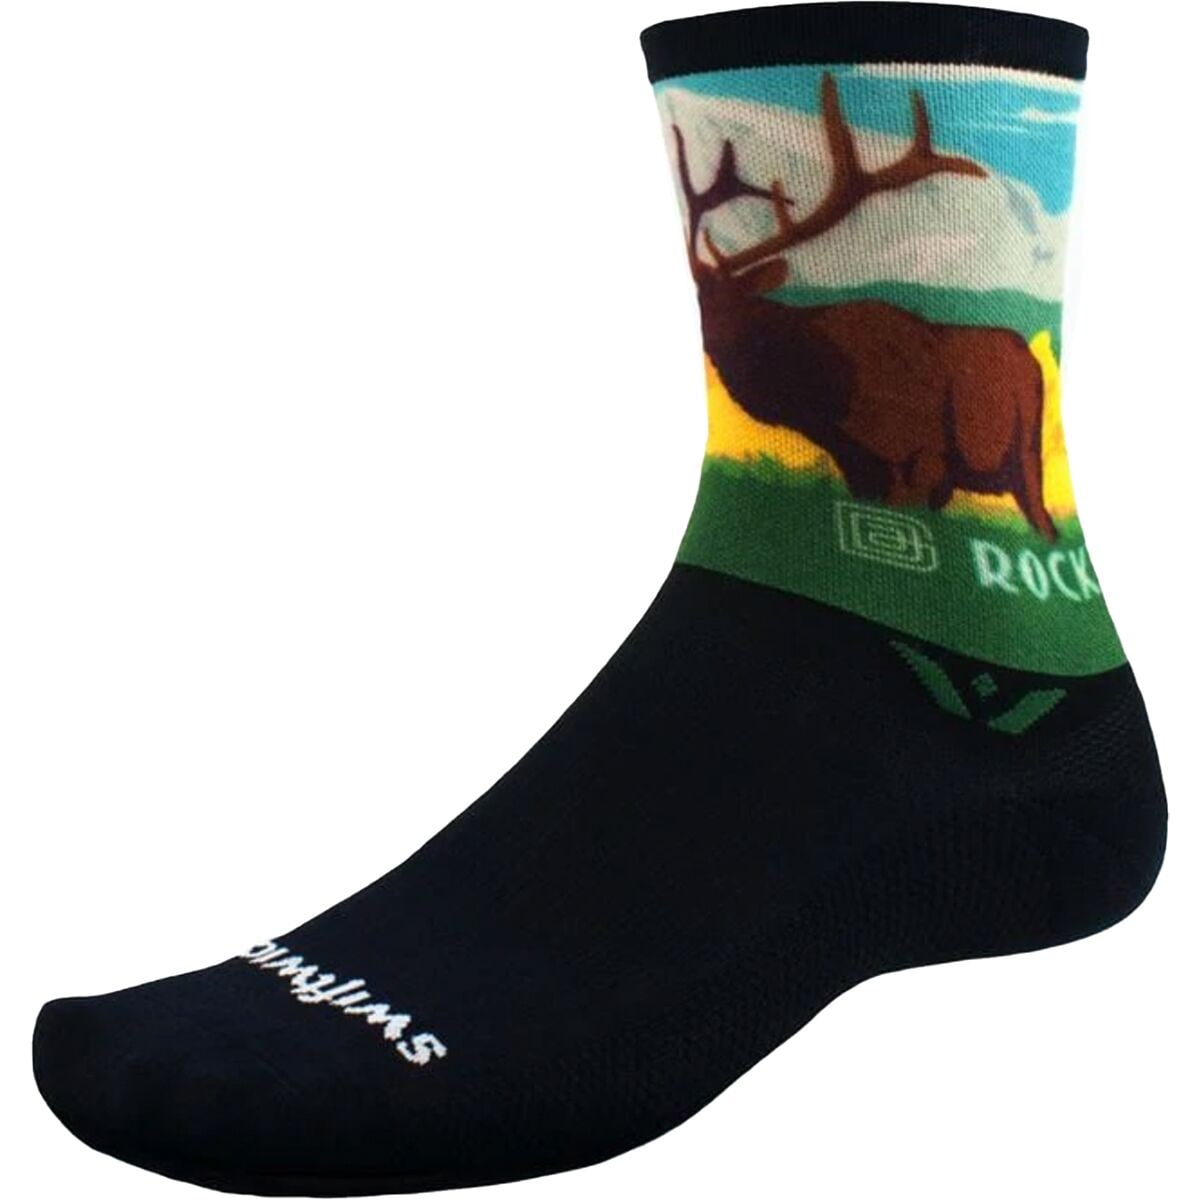 Swiftwick Vision Six Impression National Park Sock Rocky Mountains, S - Men's